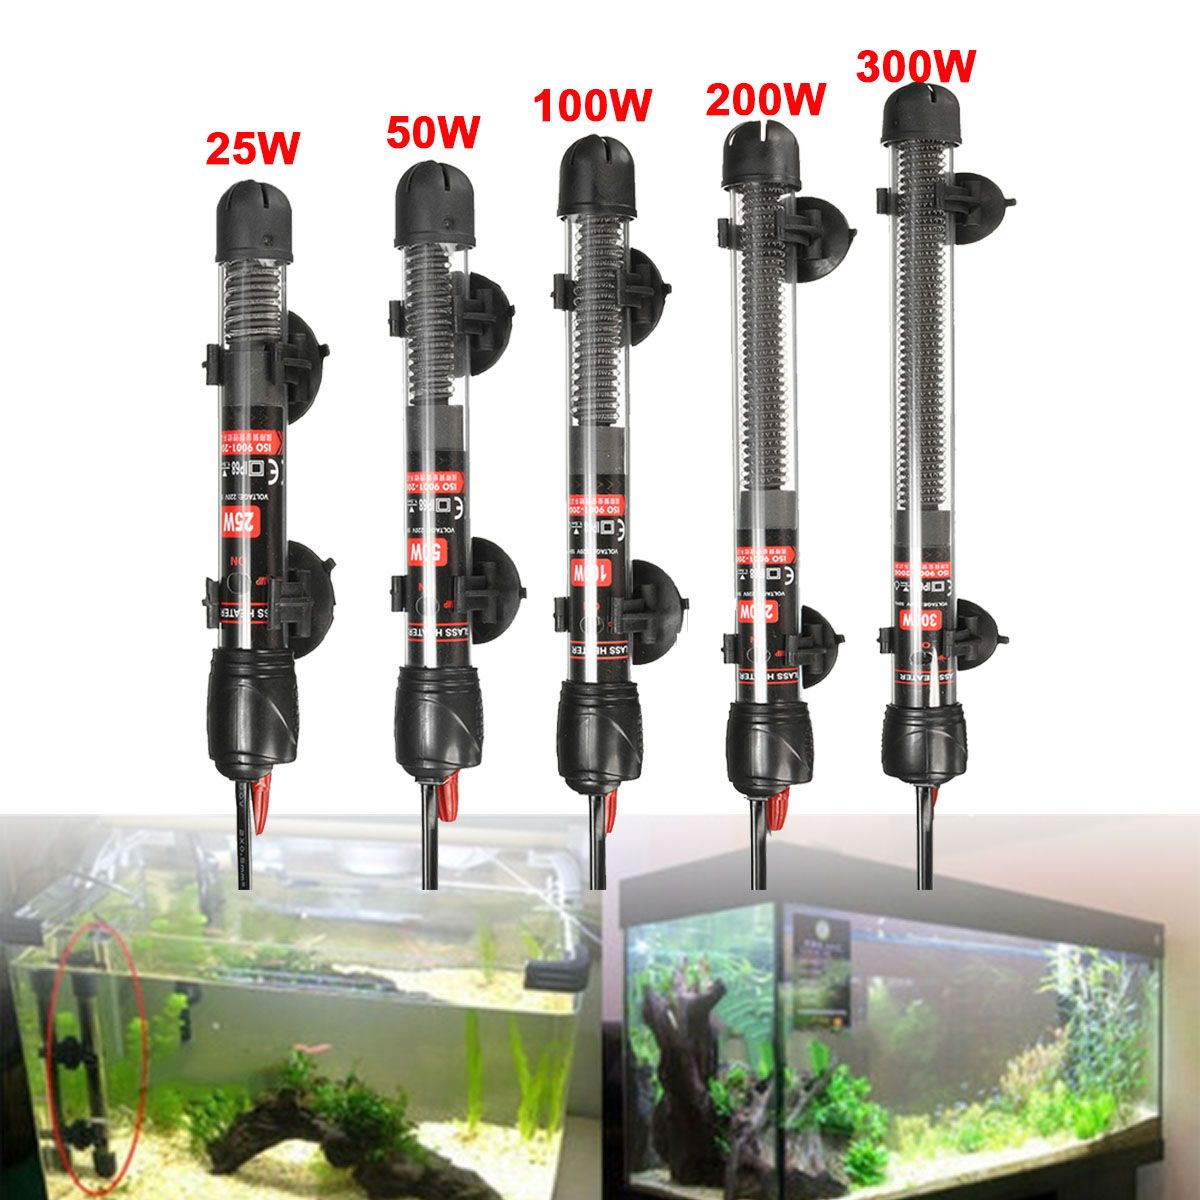 2550100200300W-Aquarium-Fish-Tank-Automatic-Water-Thermostat-Heater-with-Sucker-Cups-1385247